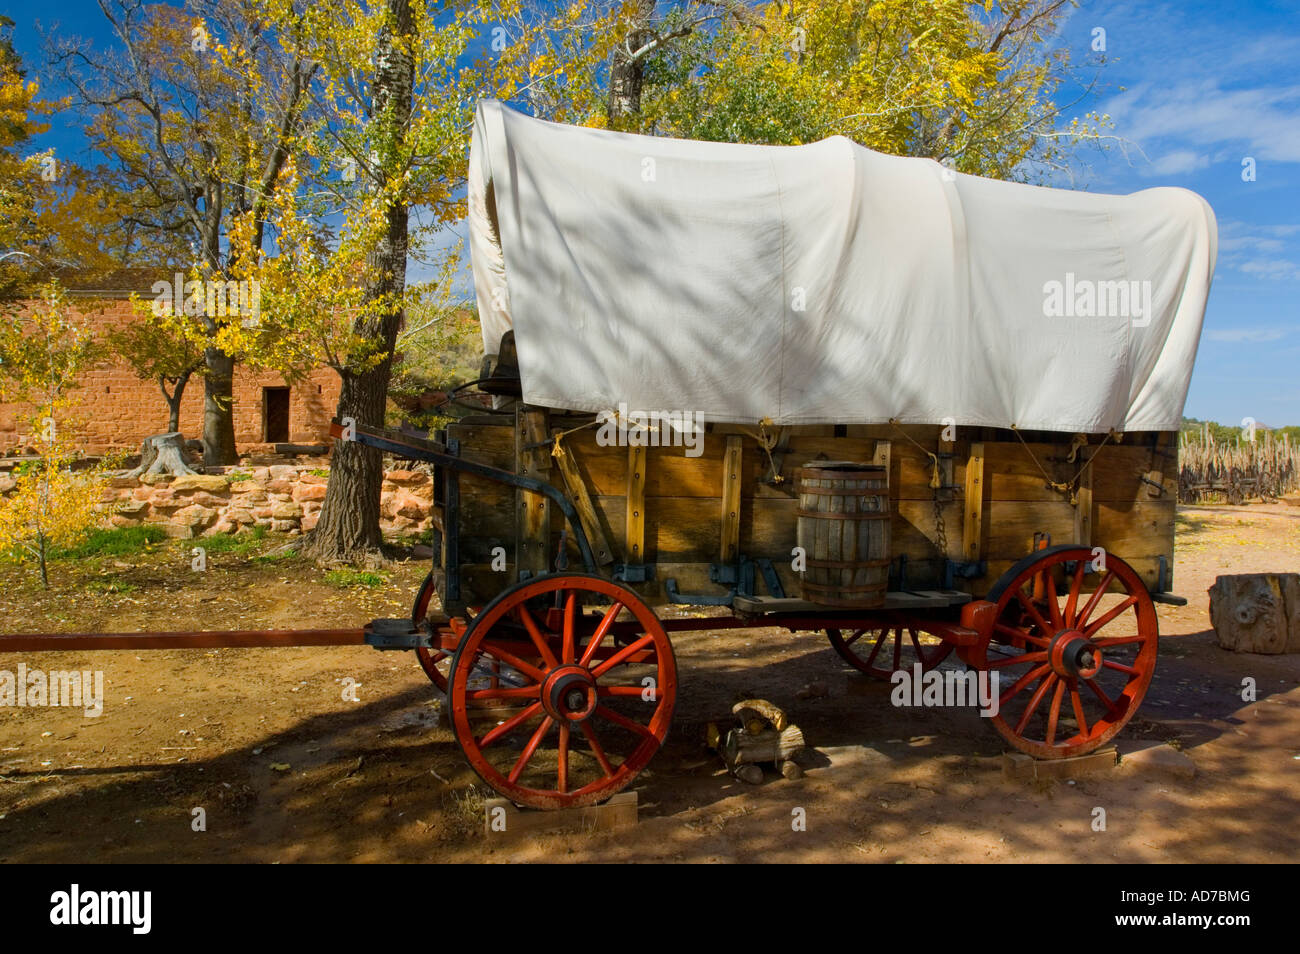 Prairie Schooner old covered wagon at Pipe Springs National Monument near Fredonia Arizona Stock Photo